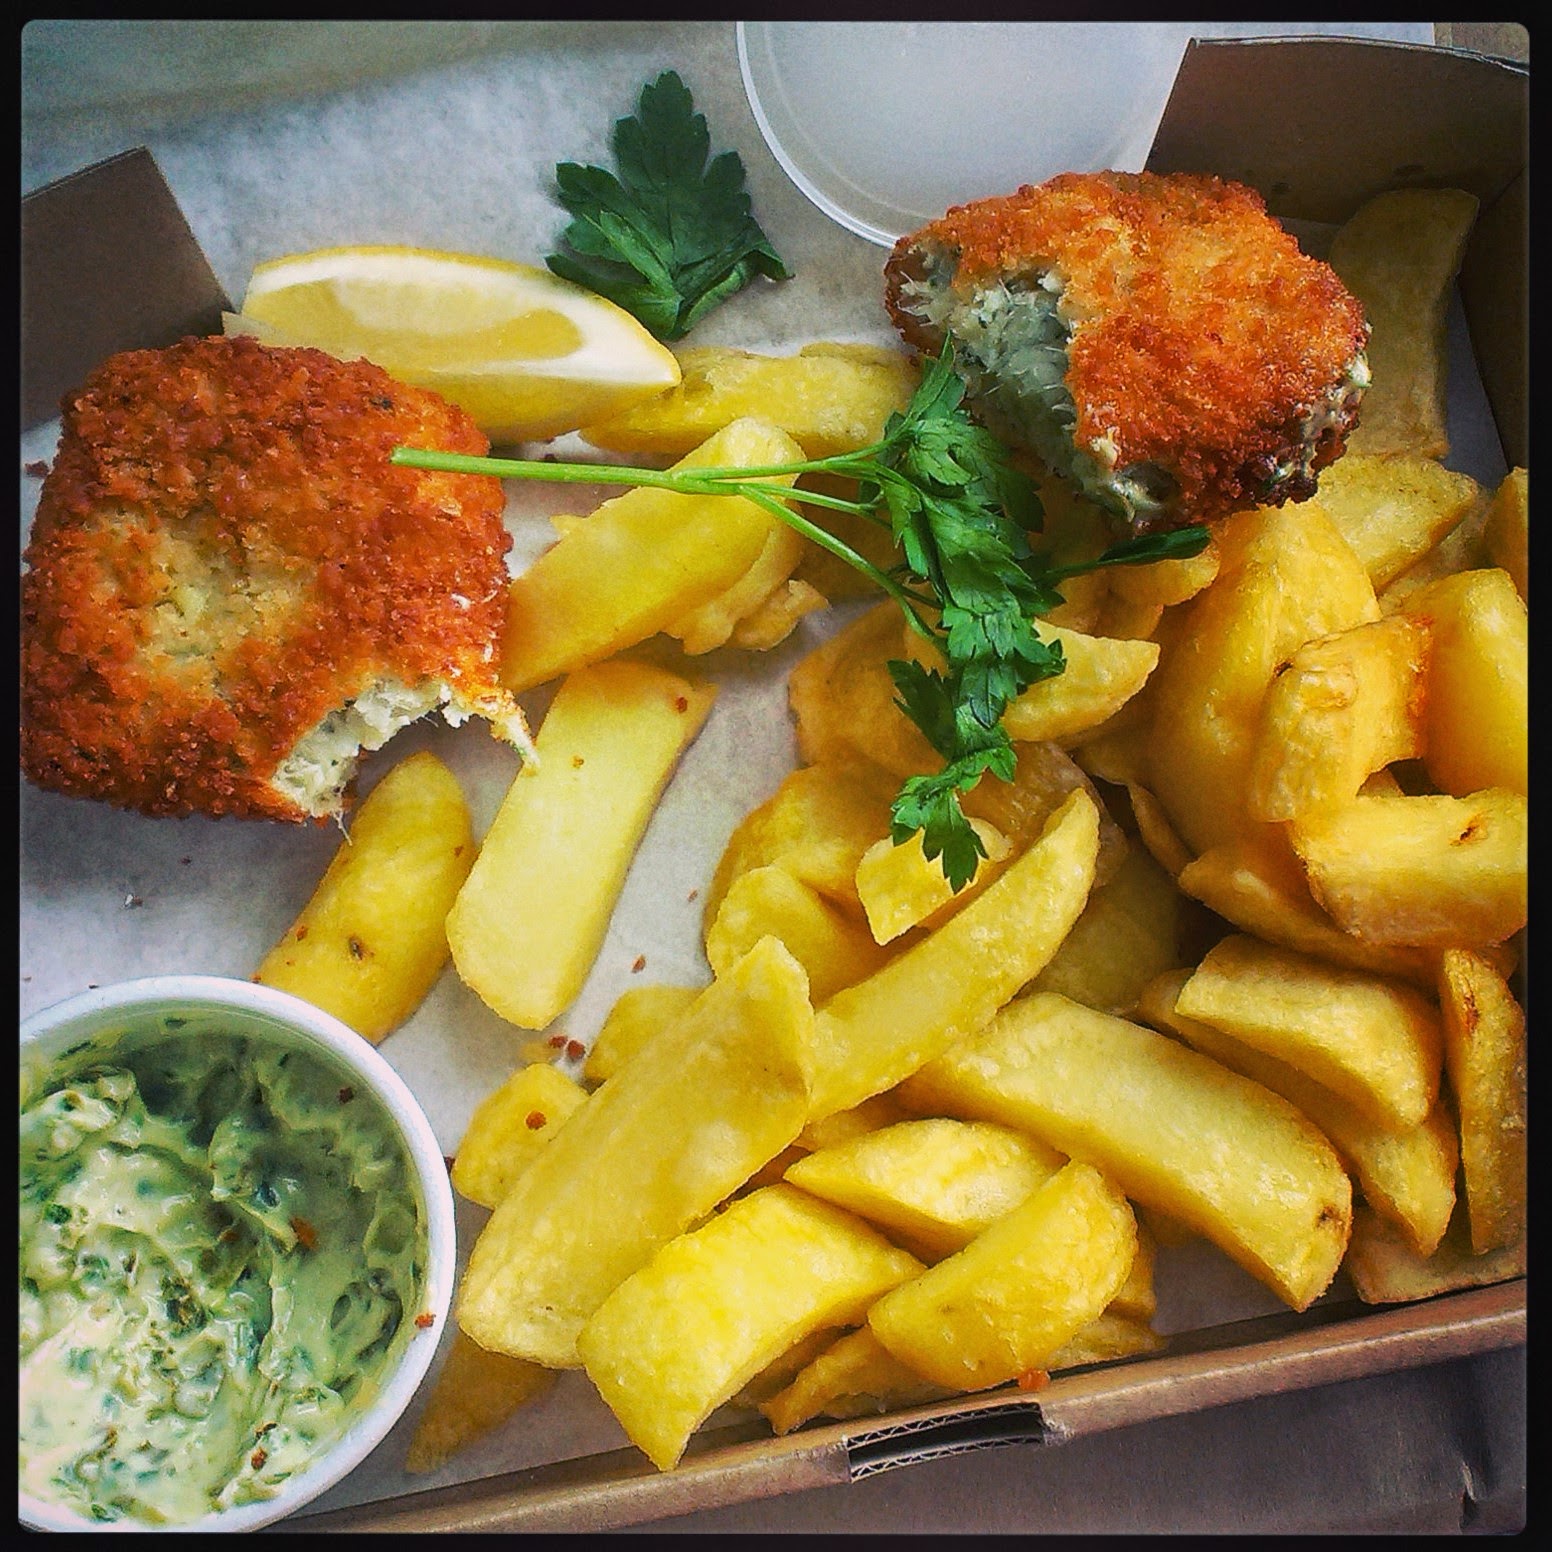 Ths Scallop Shell fishcakes and chips